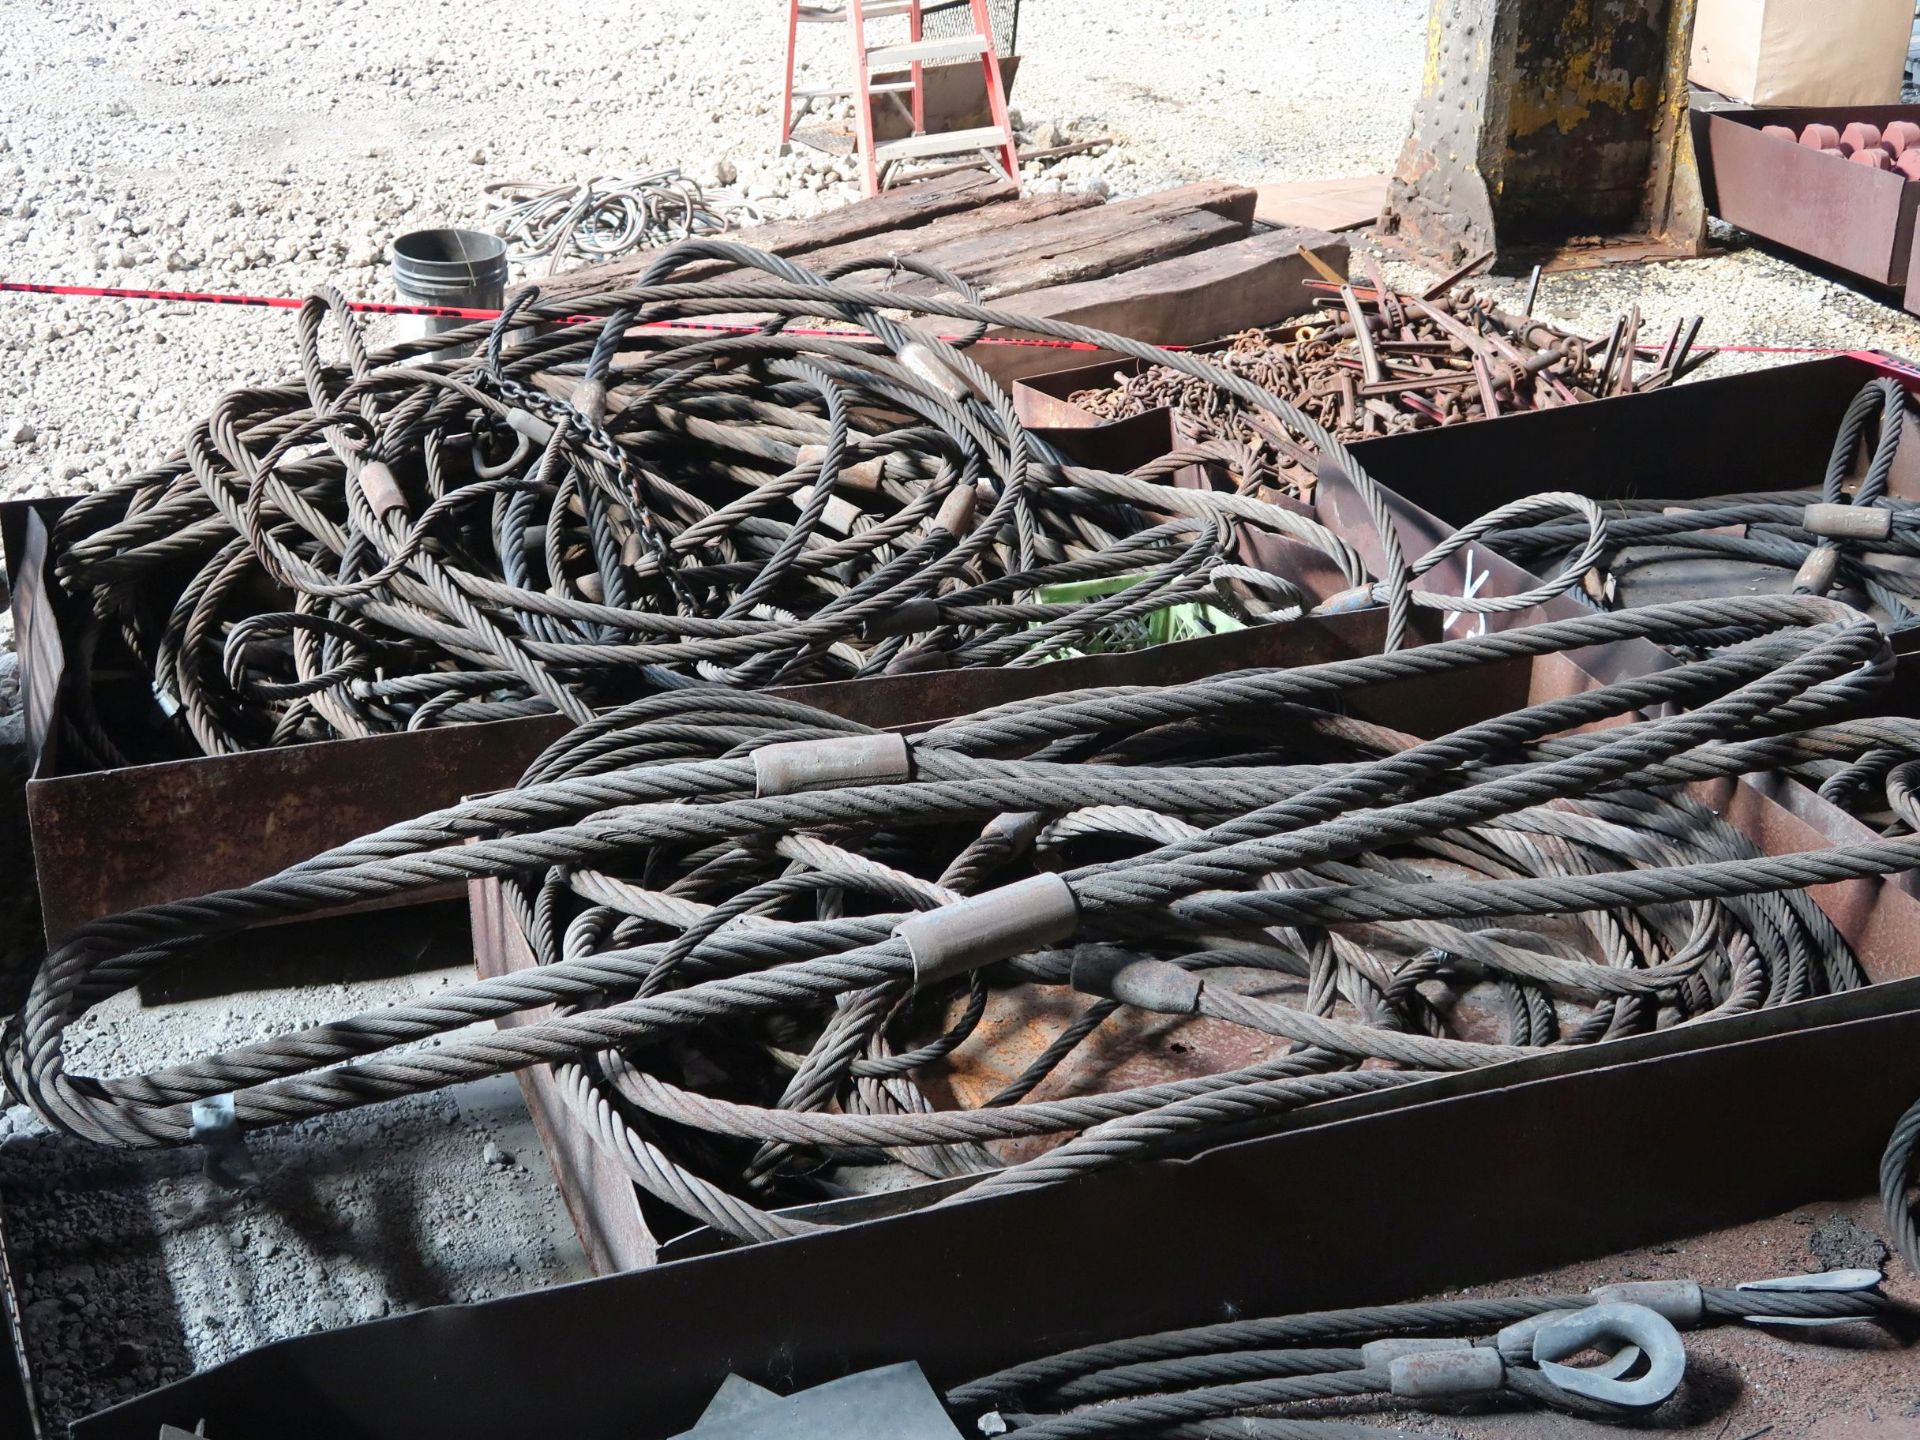 (LOT) LARGE QUANTITY OF STEEL ITEMS - PLATFORMS, BASKETS WITH RIGGING, SLINGS, SHACKLES, AND OTHER - - Image 8 of 10